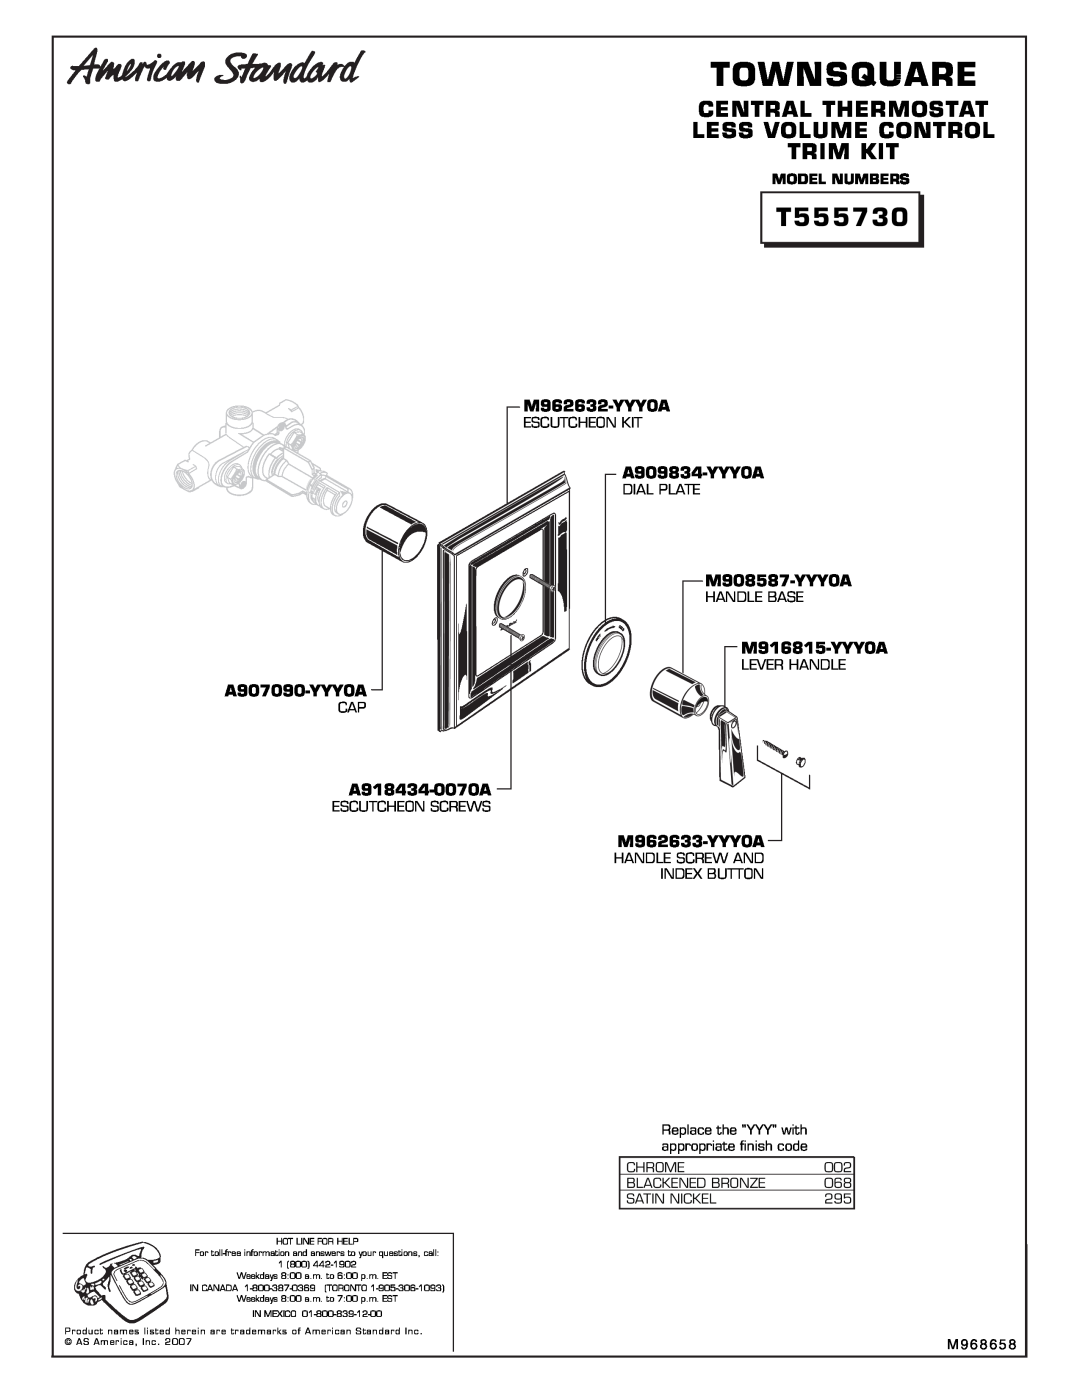 American Standard T555730 Townsquare, Central Thermostat Less Volume Control Trim Kit, A907090-YYY0A, A918434-0070A 